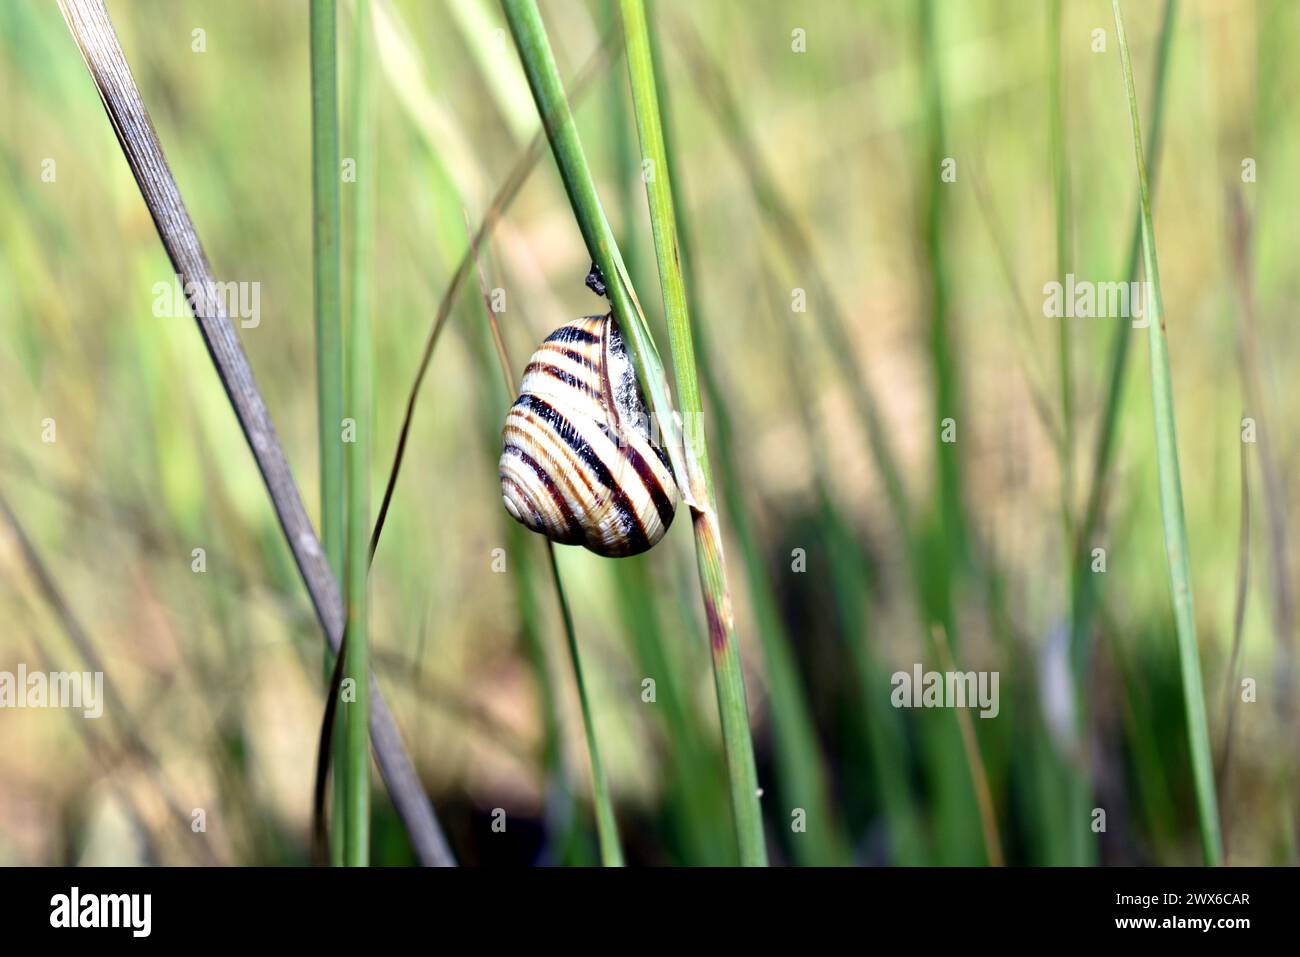 A snail with a striped shell sits on the grass. Stock Photo